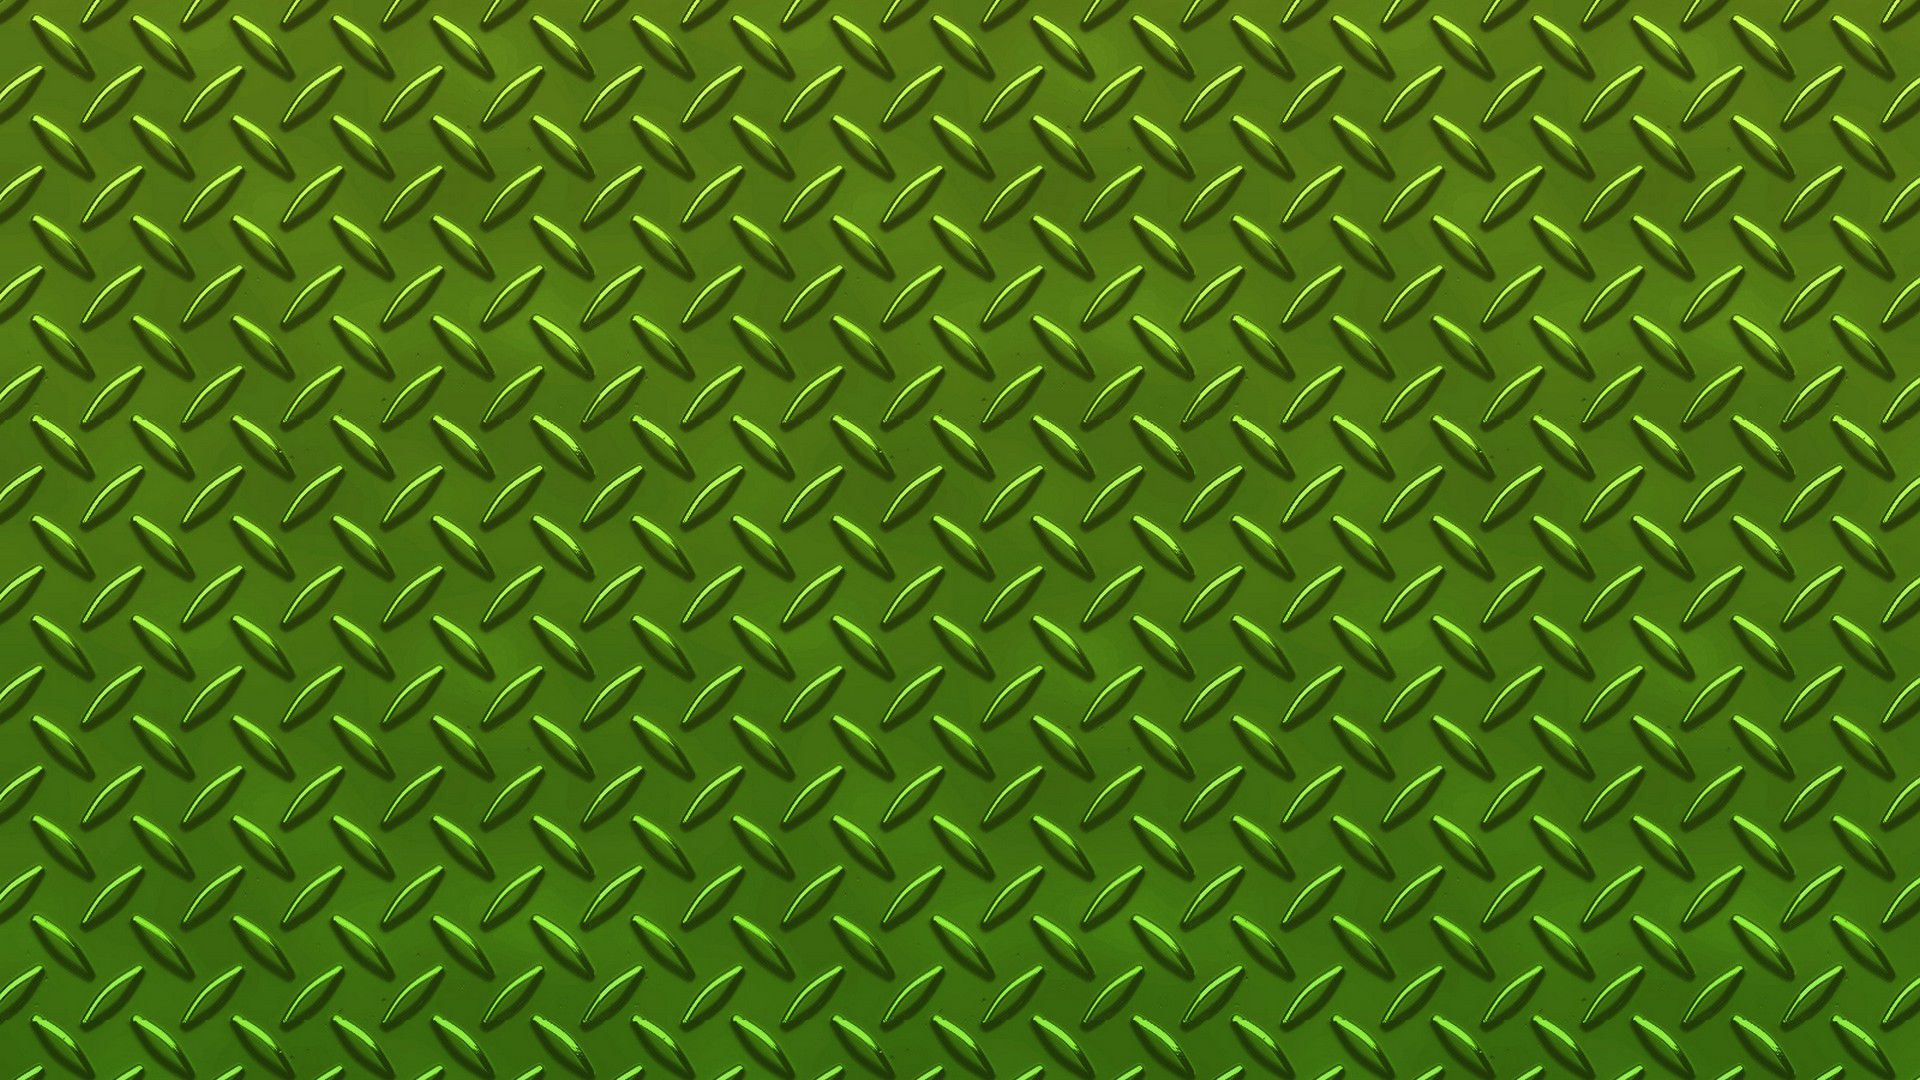 Wallpapers Computer Green With Resolution 1920X1080 pixel. You can make this wallpaper for your Desktop Computer Backgrounds, Mac Wallpapers, Android Lock screen or iPhone Screensavers